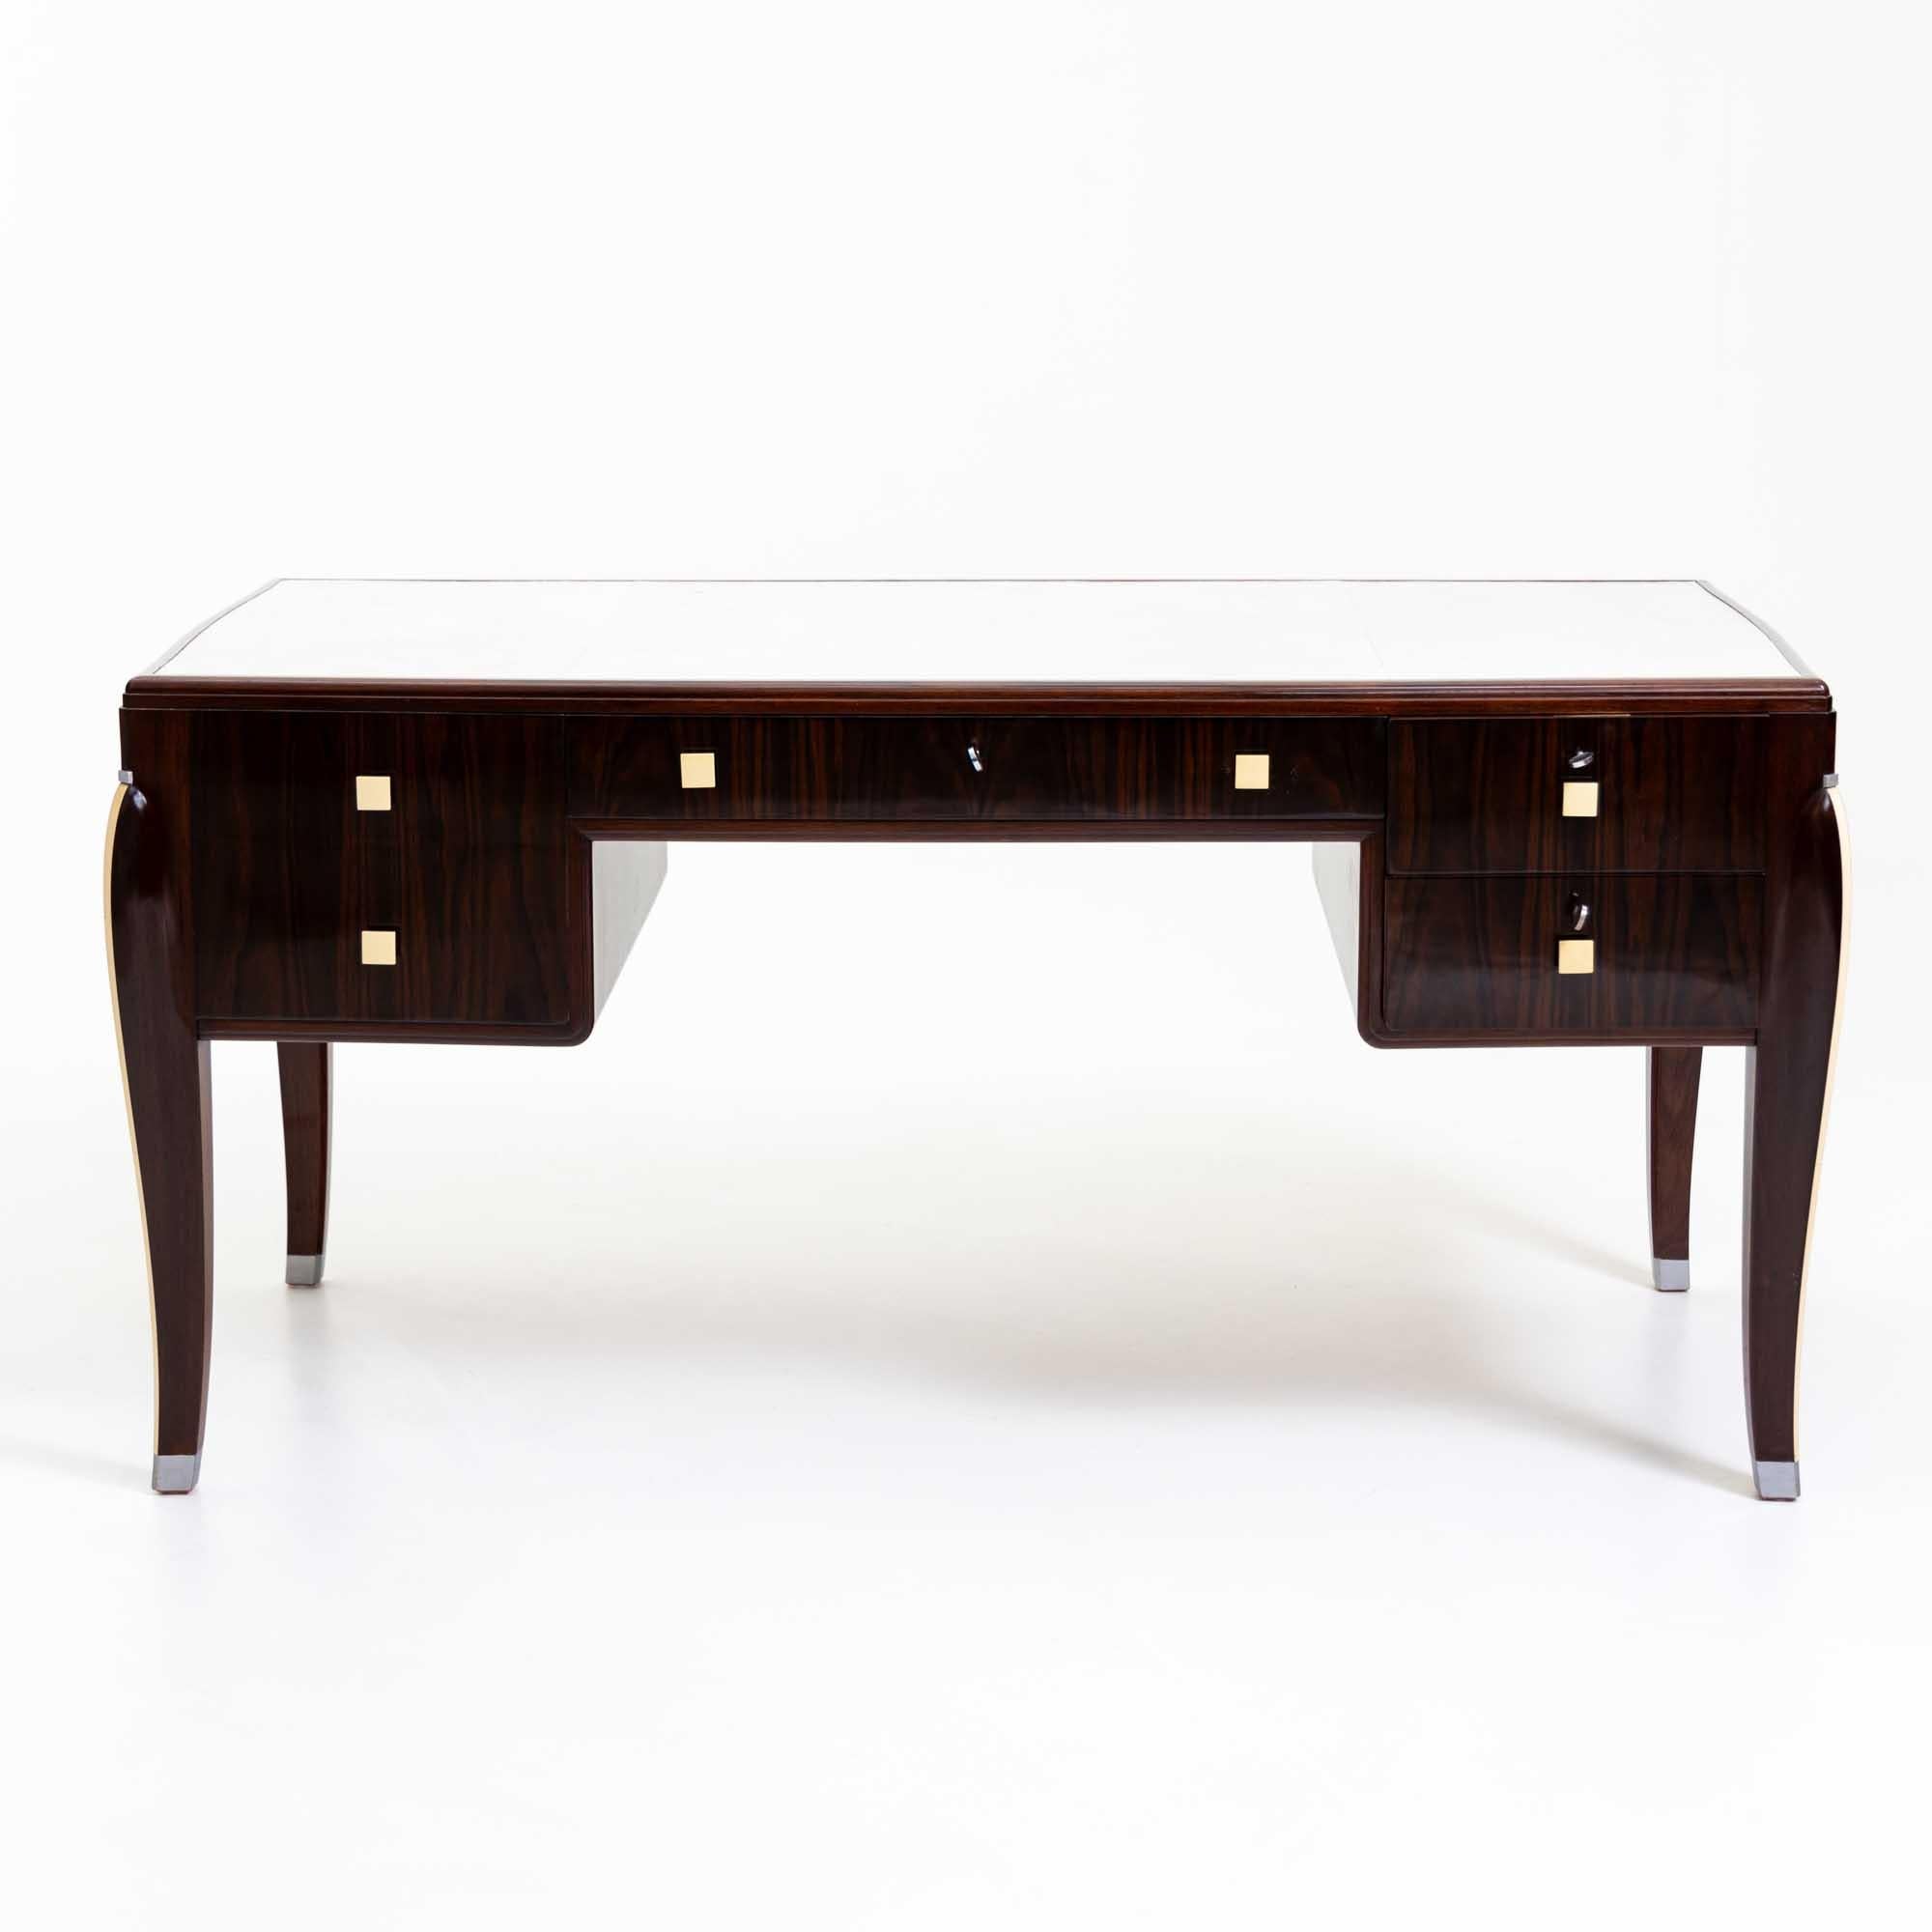 French Art Deco Desk in the style of Jacques-Emile Ruhlmann (1879-1933), France, 1920s For Sale